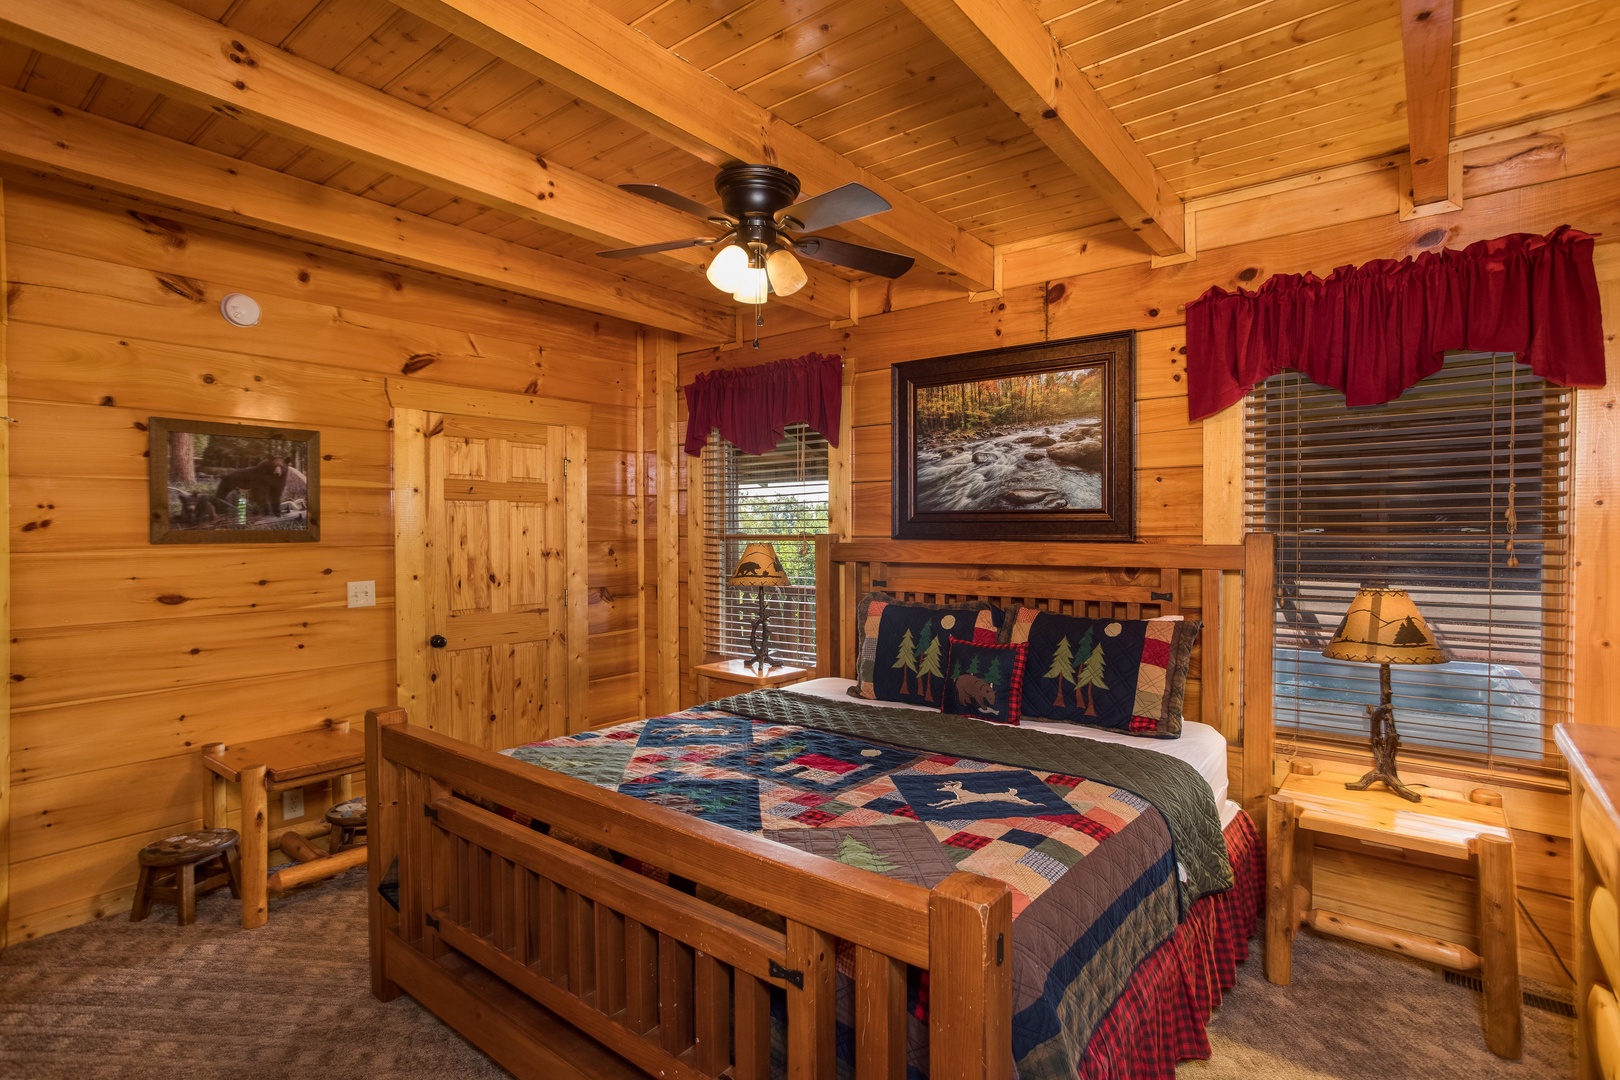 Bedroom with a bed, night stands, and lamps at Graceland, a 4-bedroom cabin rental located in Pigeon Forge